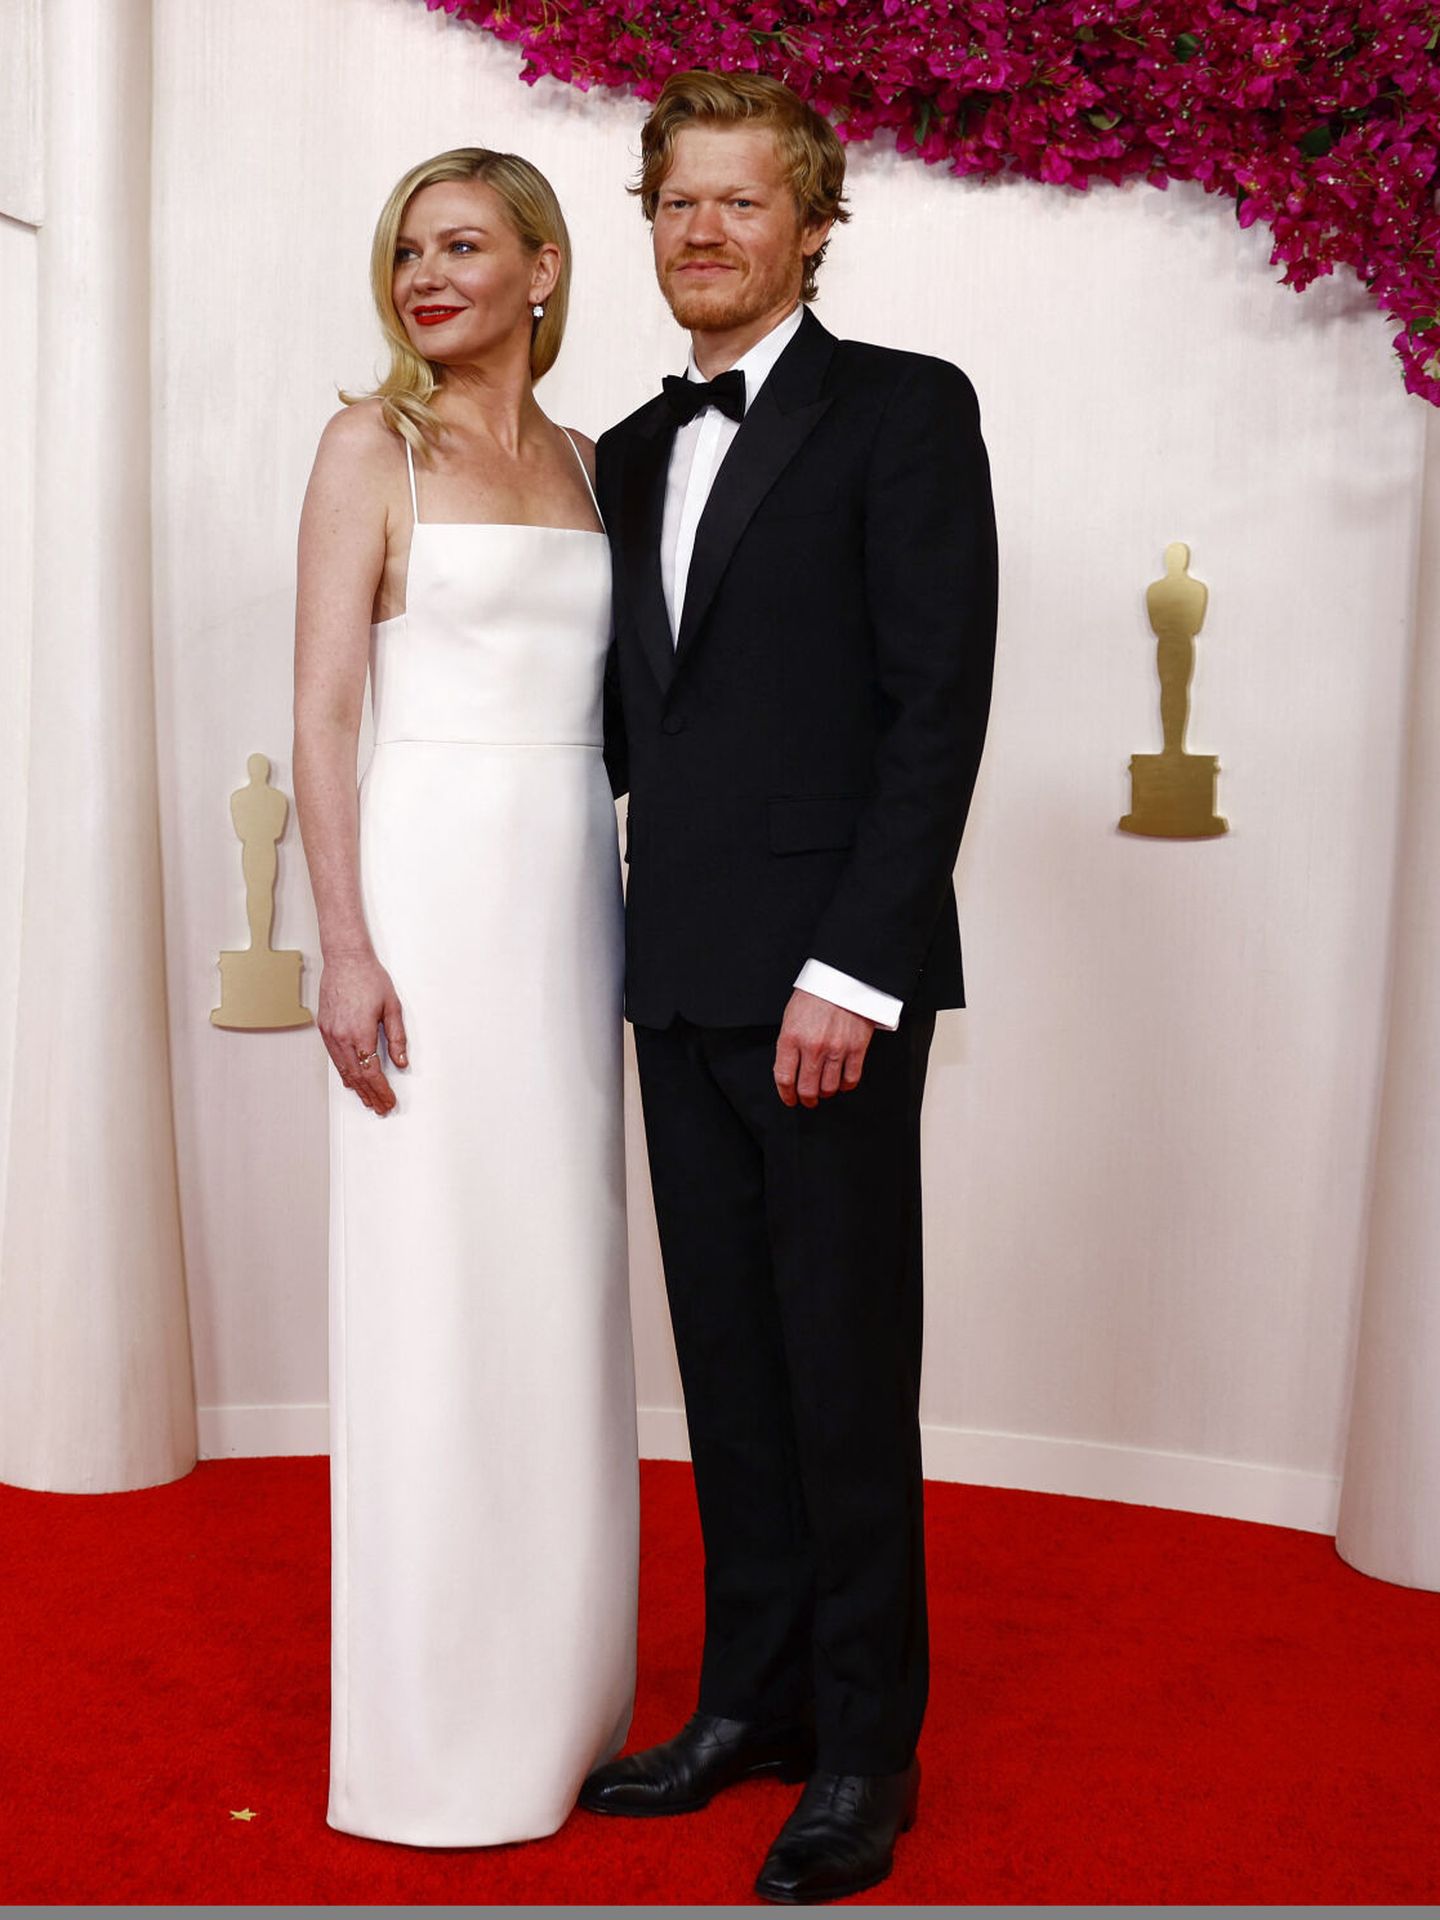 Kirsten Dunst and Jesse Plemons pose on the red carpet during the Oscars arrivals at the 96th Academy Awards in Hollywood, Los Angeles, California, U.S., March 10, 2024. REUTERS Sarah Meyssonnier